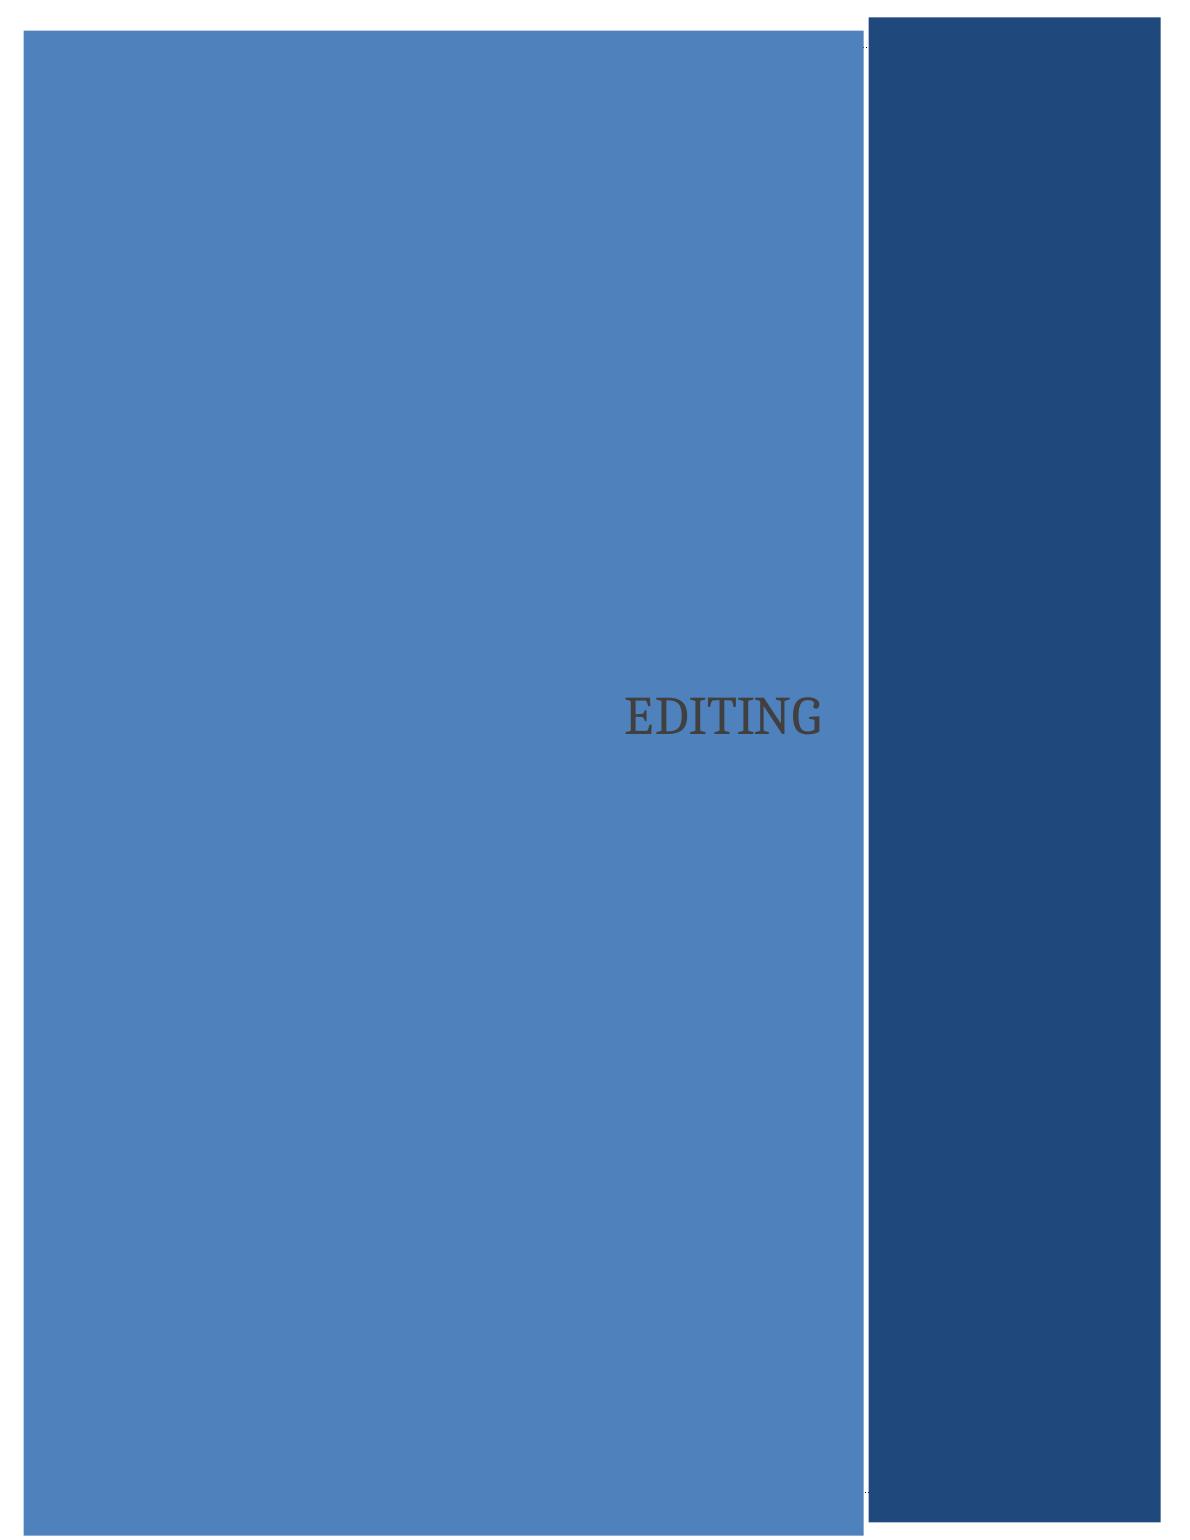 assignment of editing